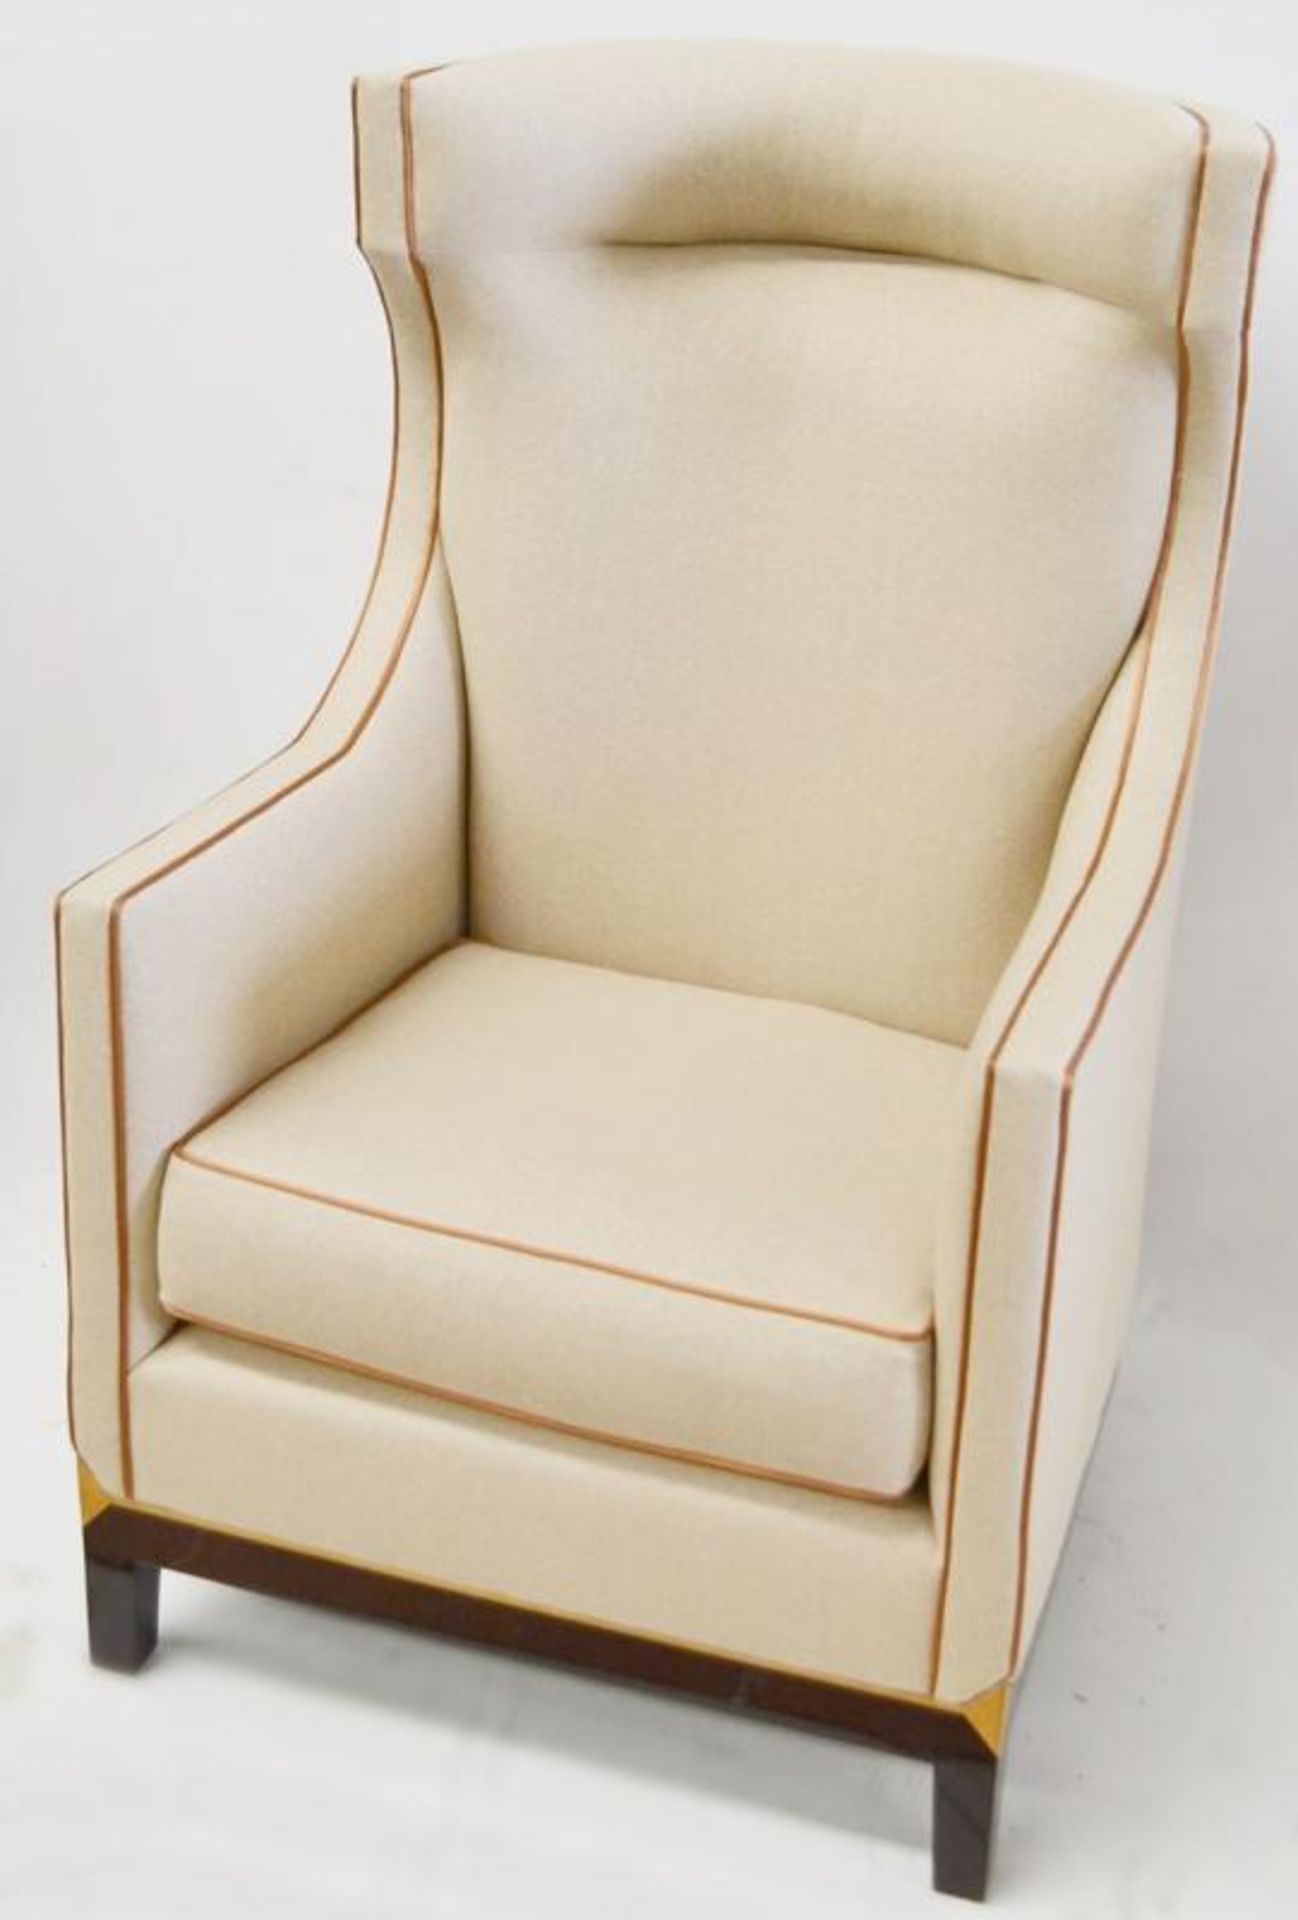 1 x Artistic Upholstery Ltd 'Burlington' Wing Back Chair With Matching Stool - RRP £7,358.00 - Image 7 of 10